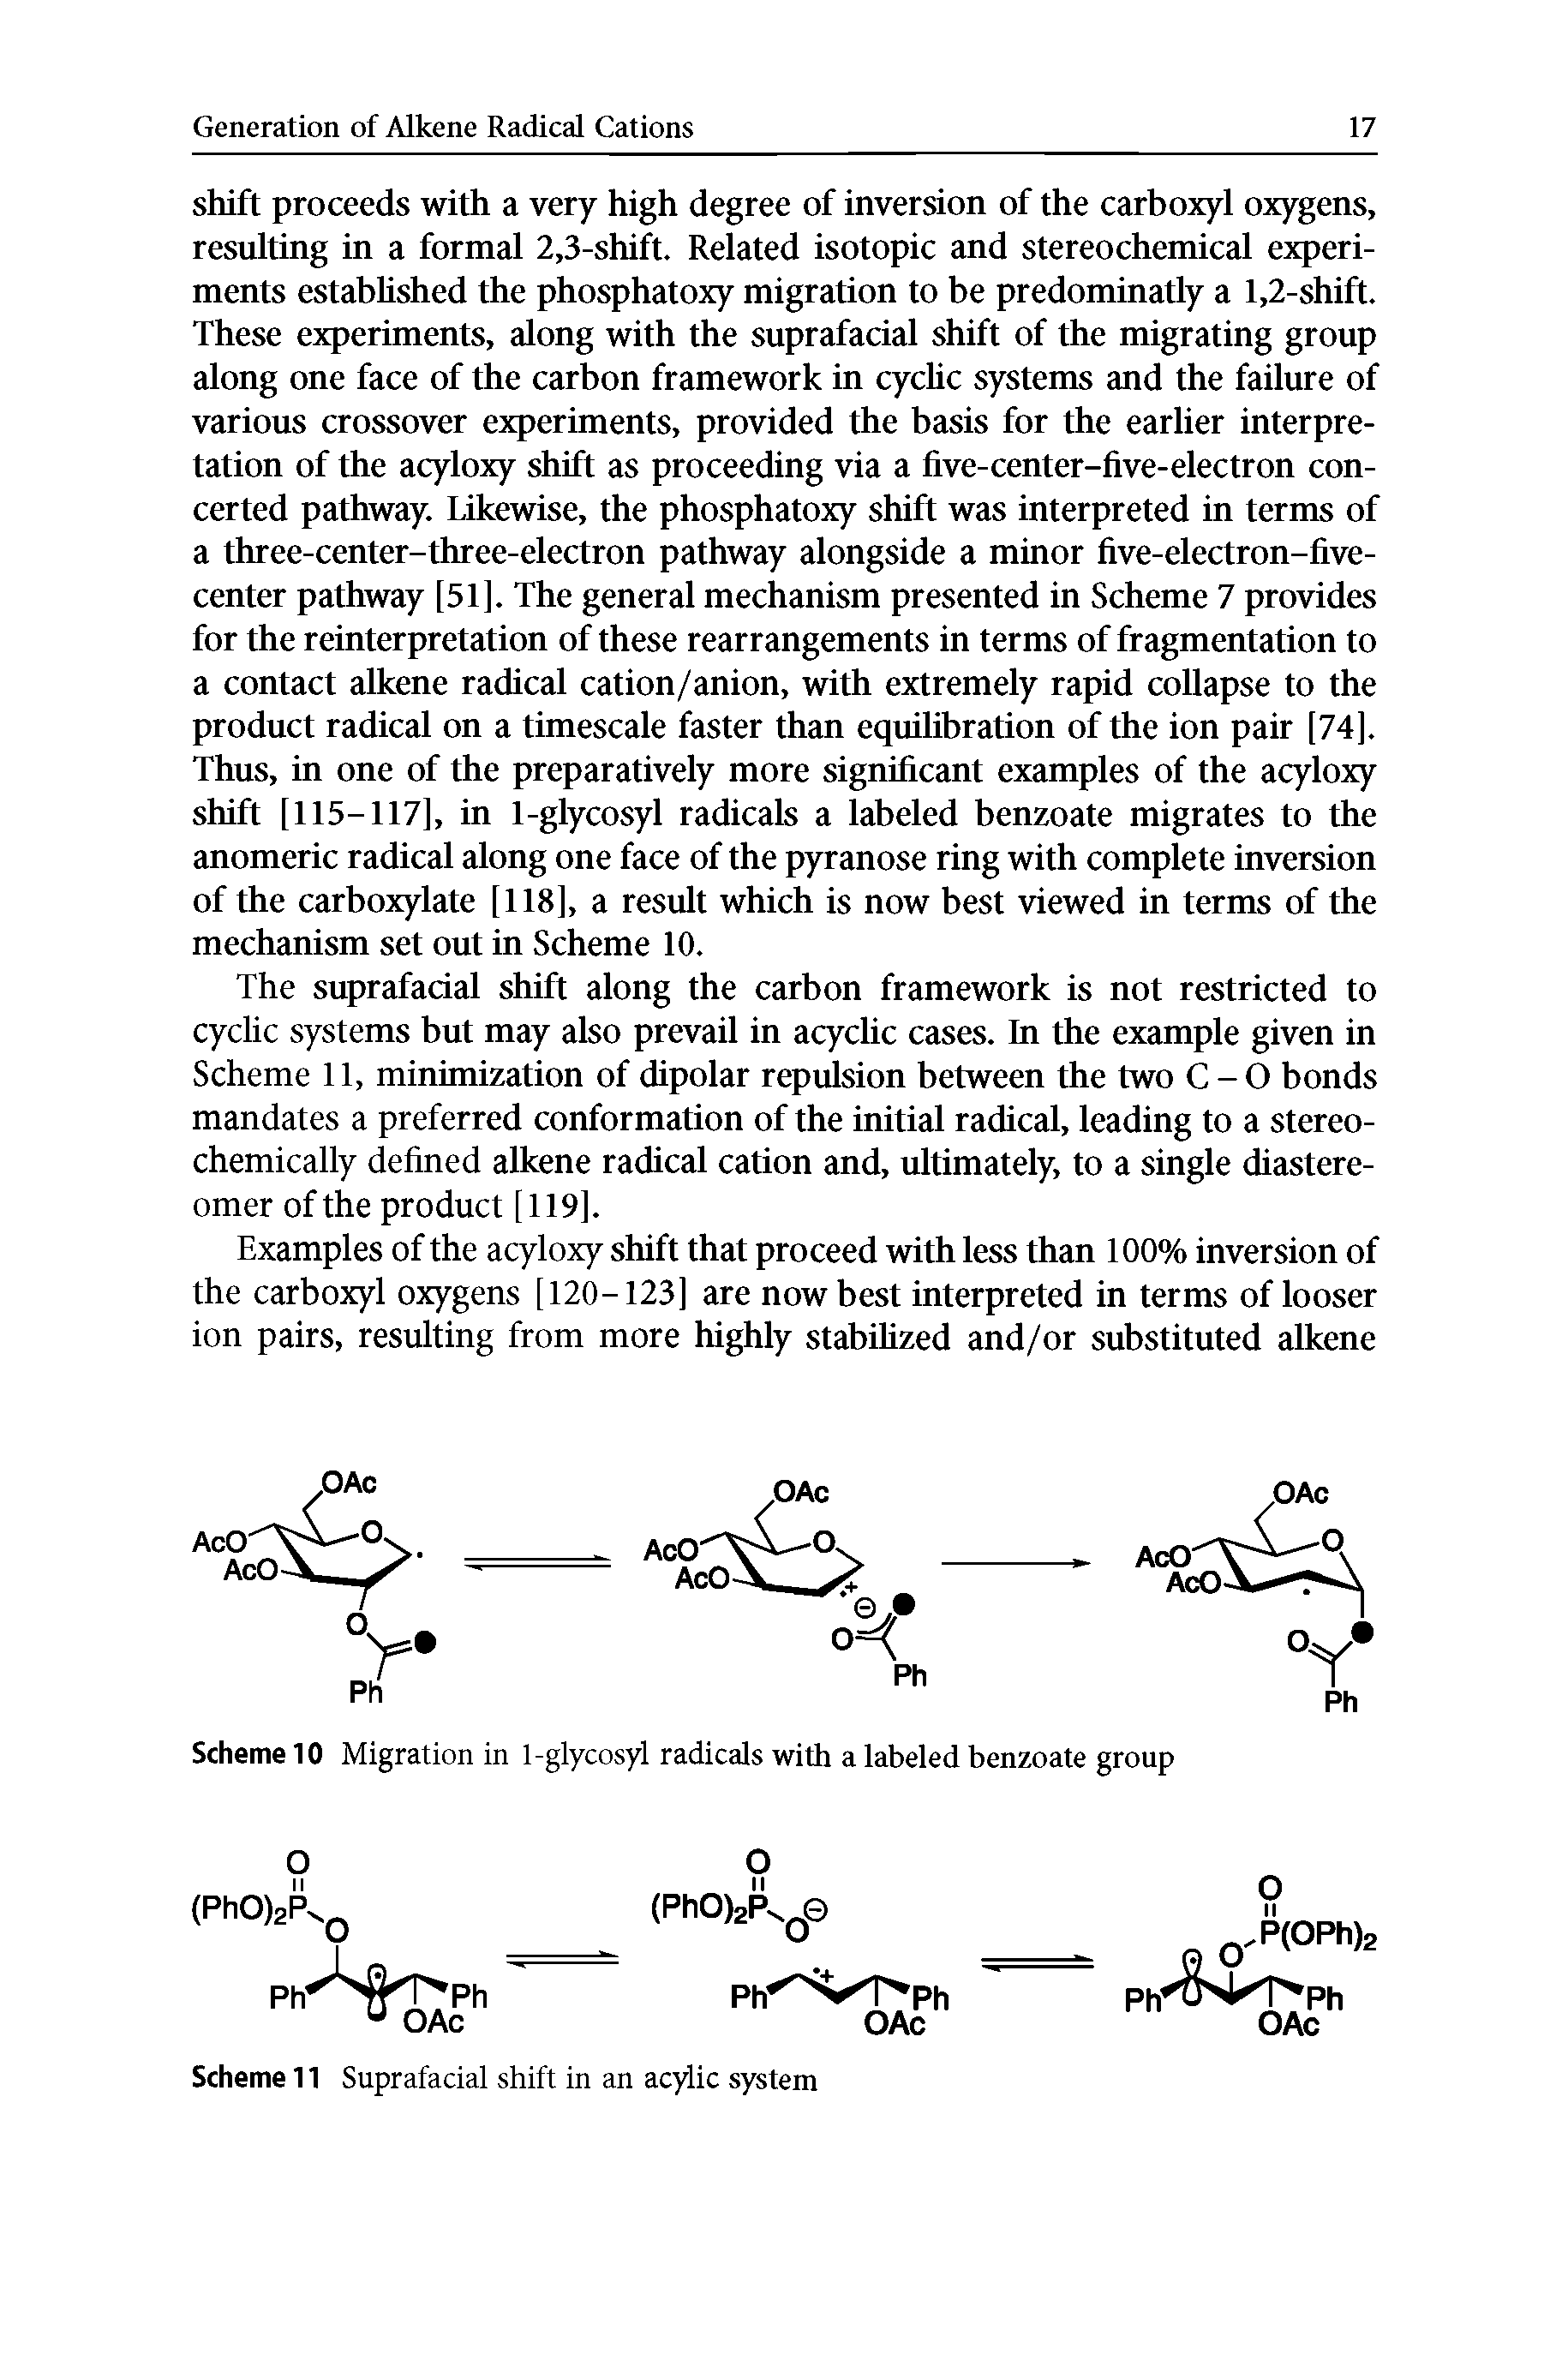 Scheme 10 Migration in 1-glycosyl radicals with a labeled benzoate group...